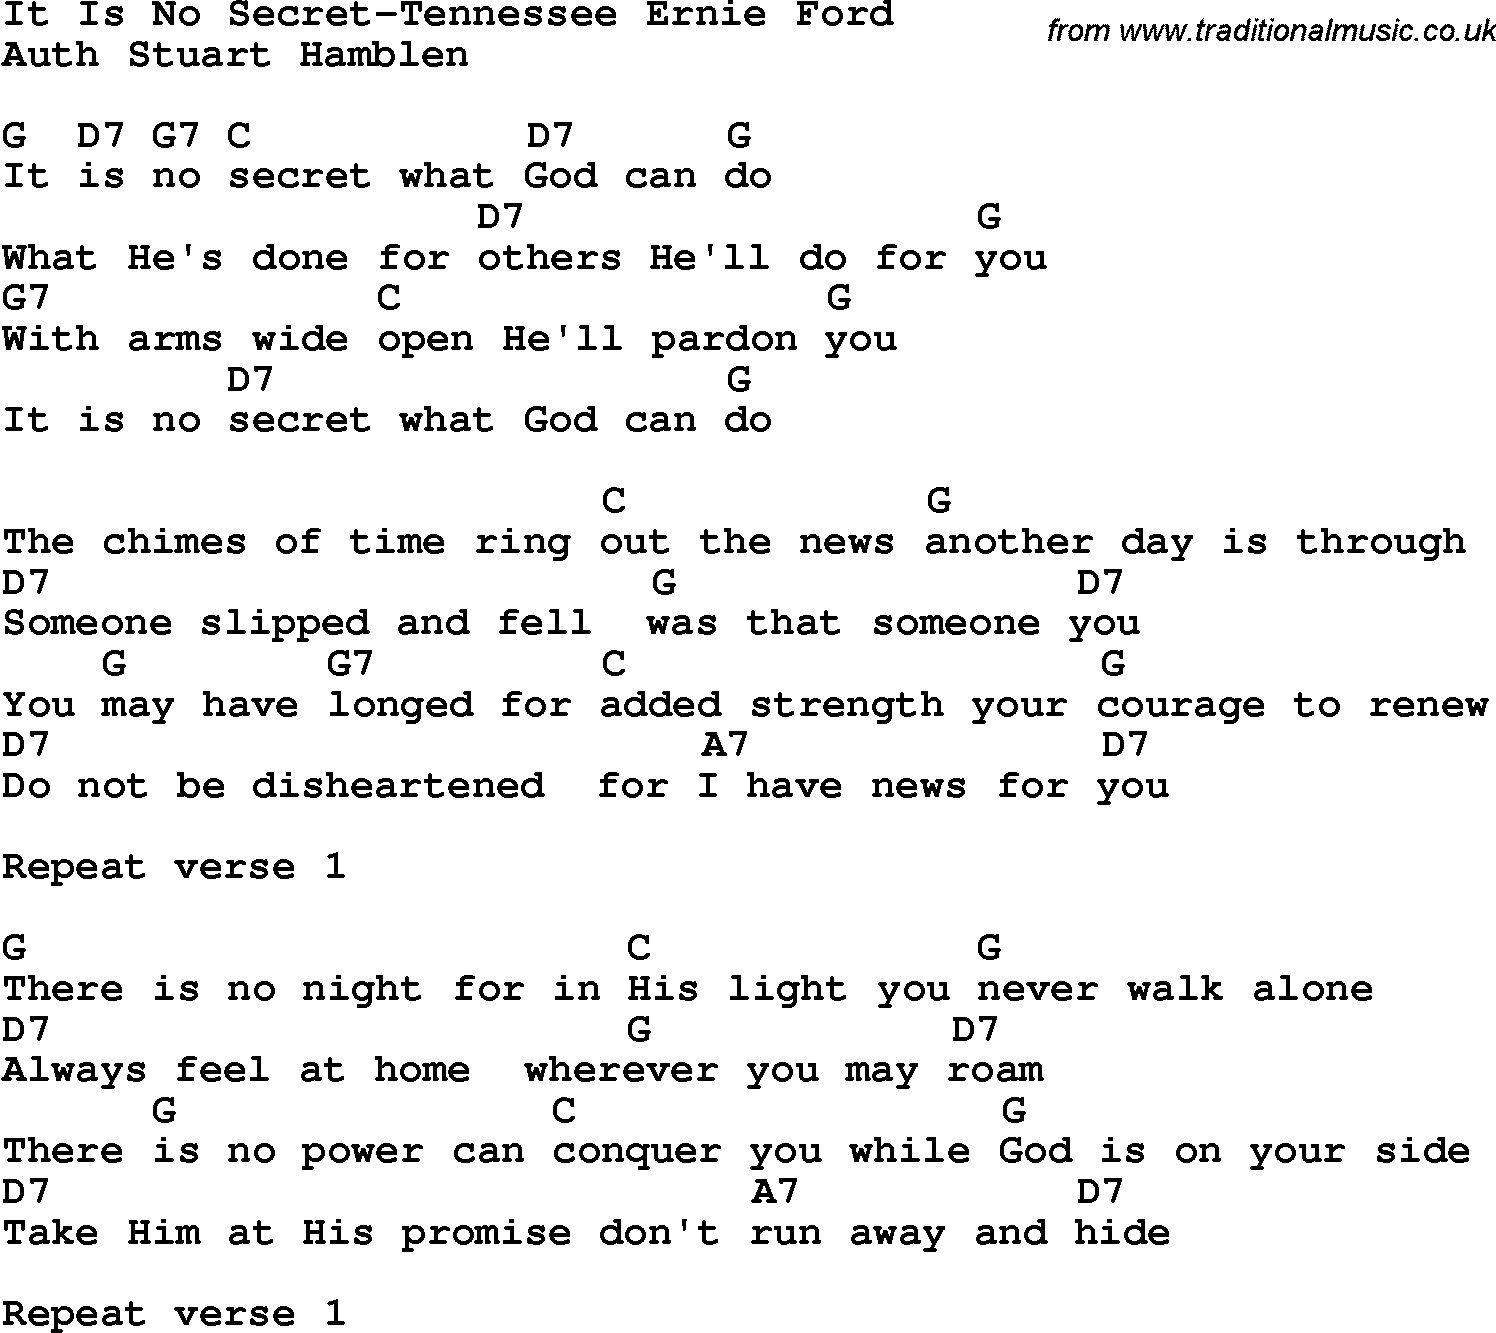 Country, Southern and Bluegrass Gospel Song It Is No Secret-Tennessee Ernie Ford lyrics and chords